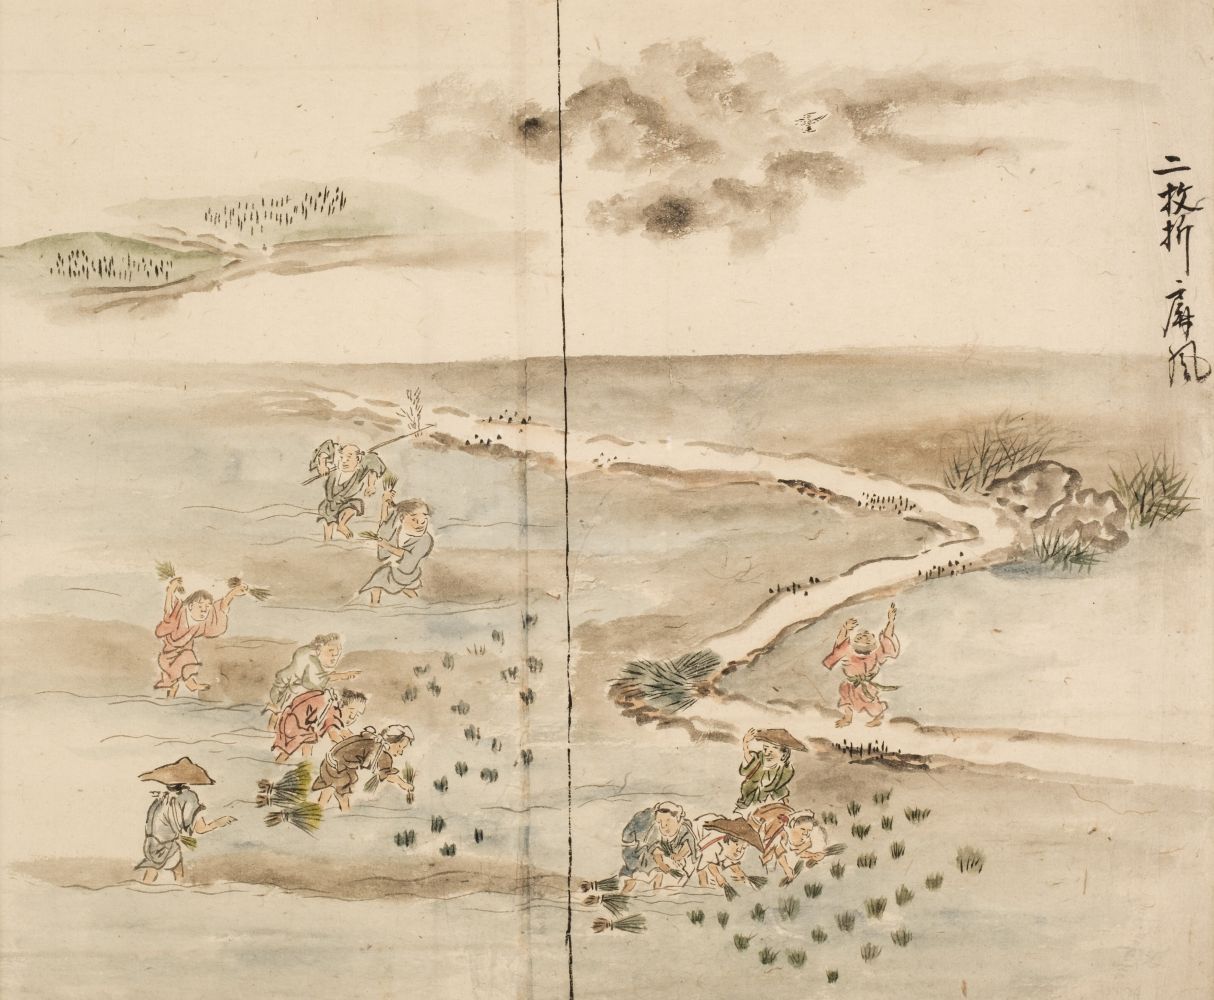 Japanese School. Landscape with Figures, 18th century, two watercolour and ink